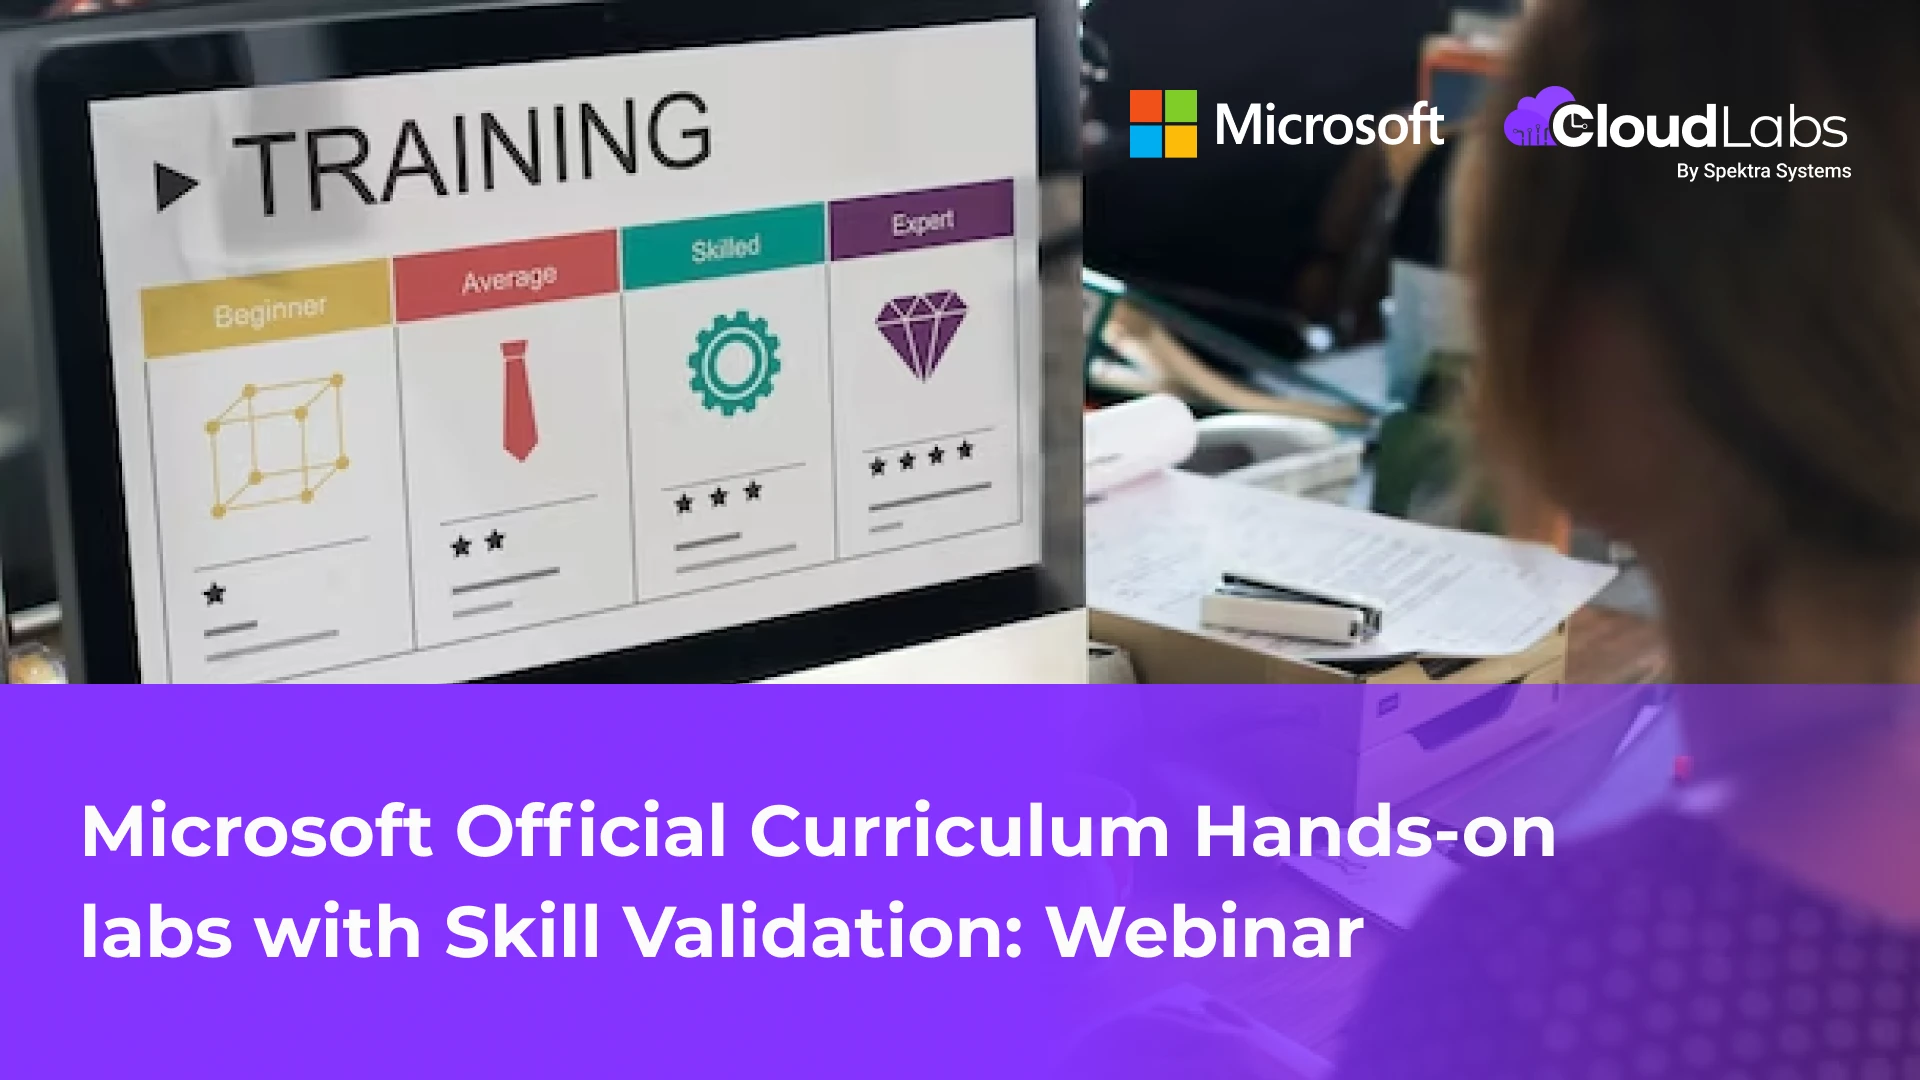 Microsoft Official Curriculum Hands-on labs with Skill Validation: Webinar